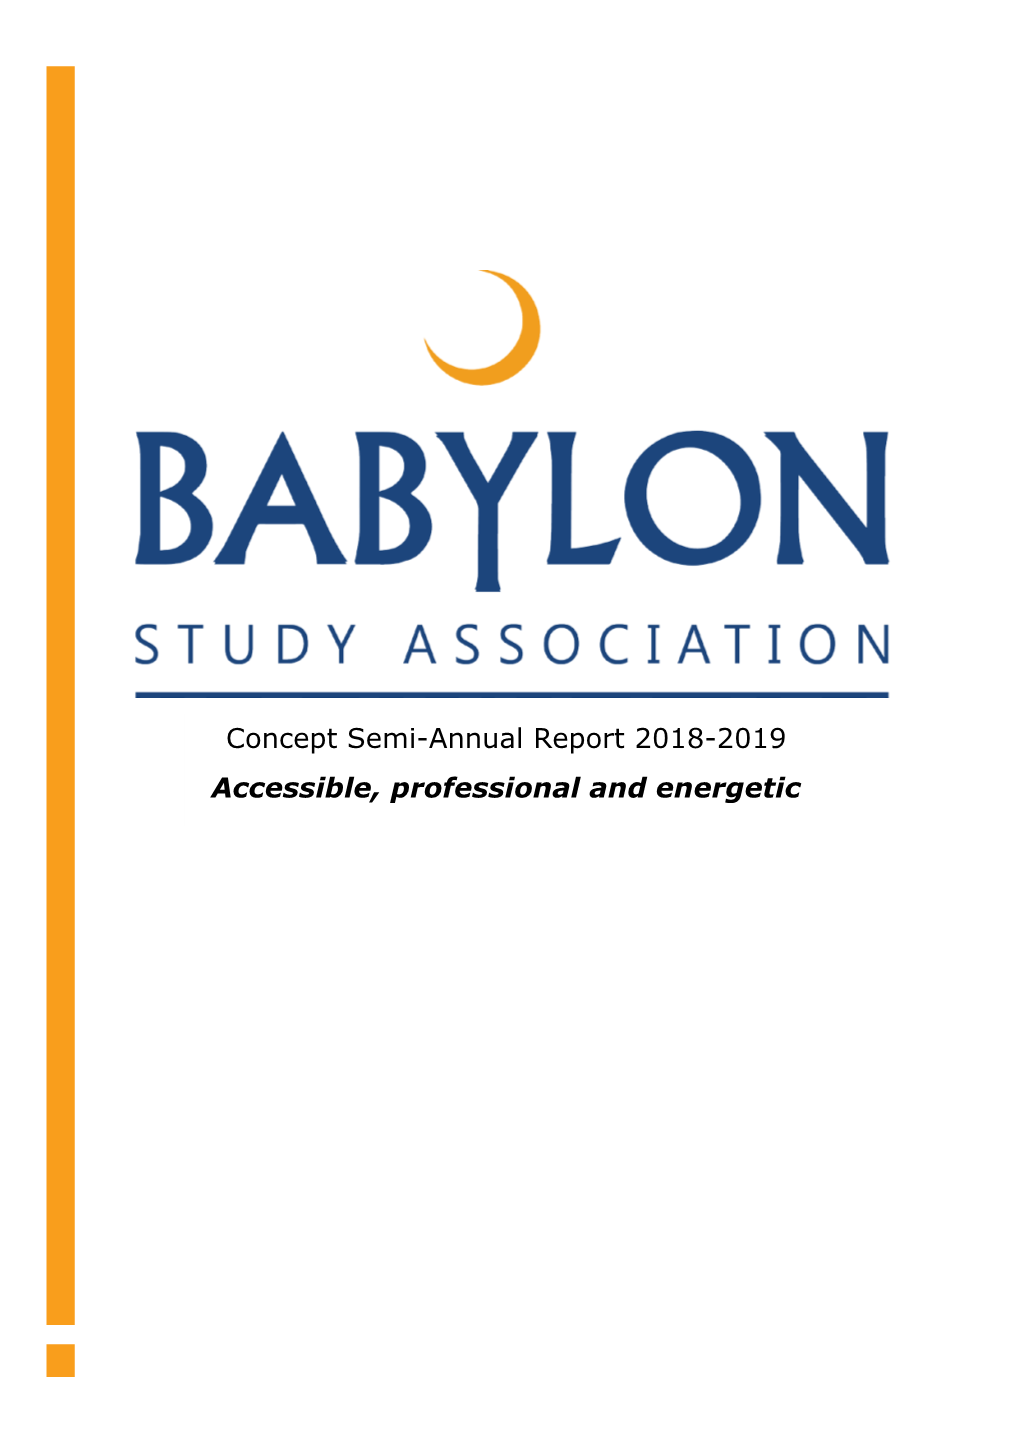 Concept Semi-Annual Report 2018-2019 Accessible, Professional and Energetic Xxxth Board of Babylon